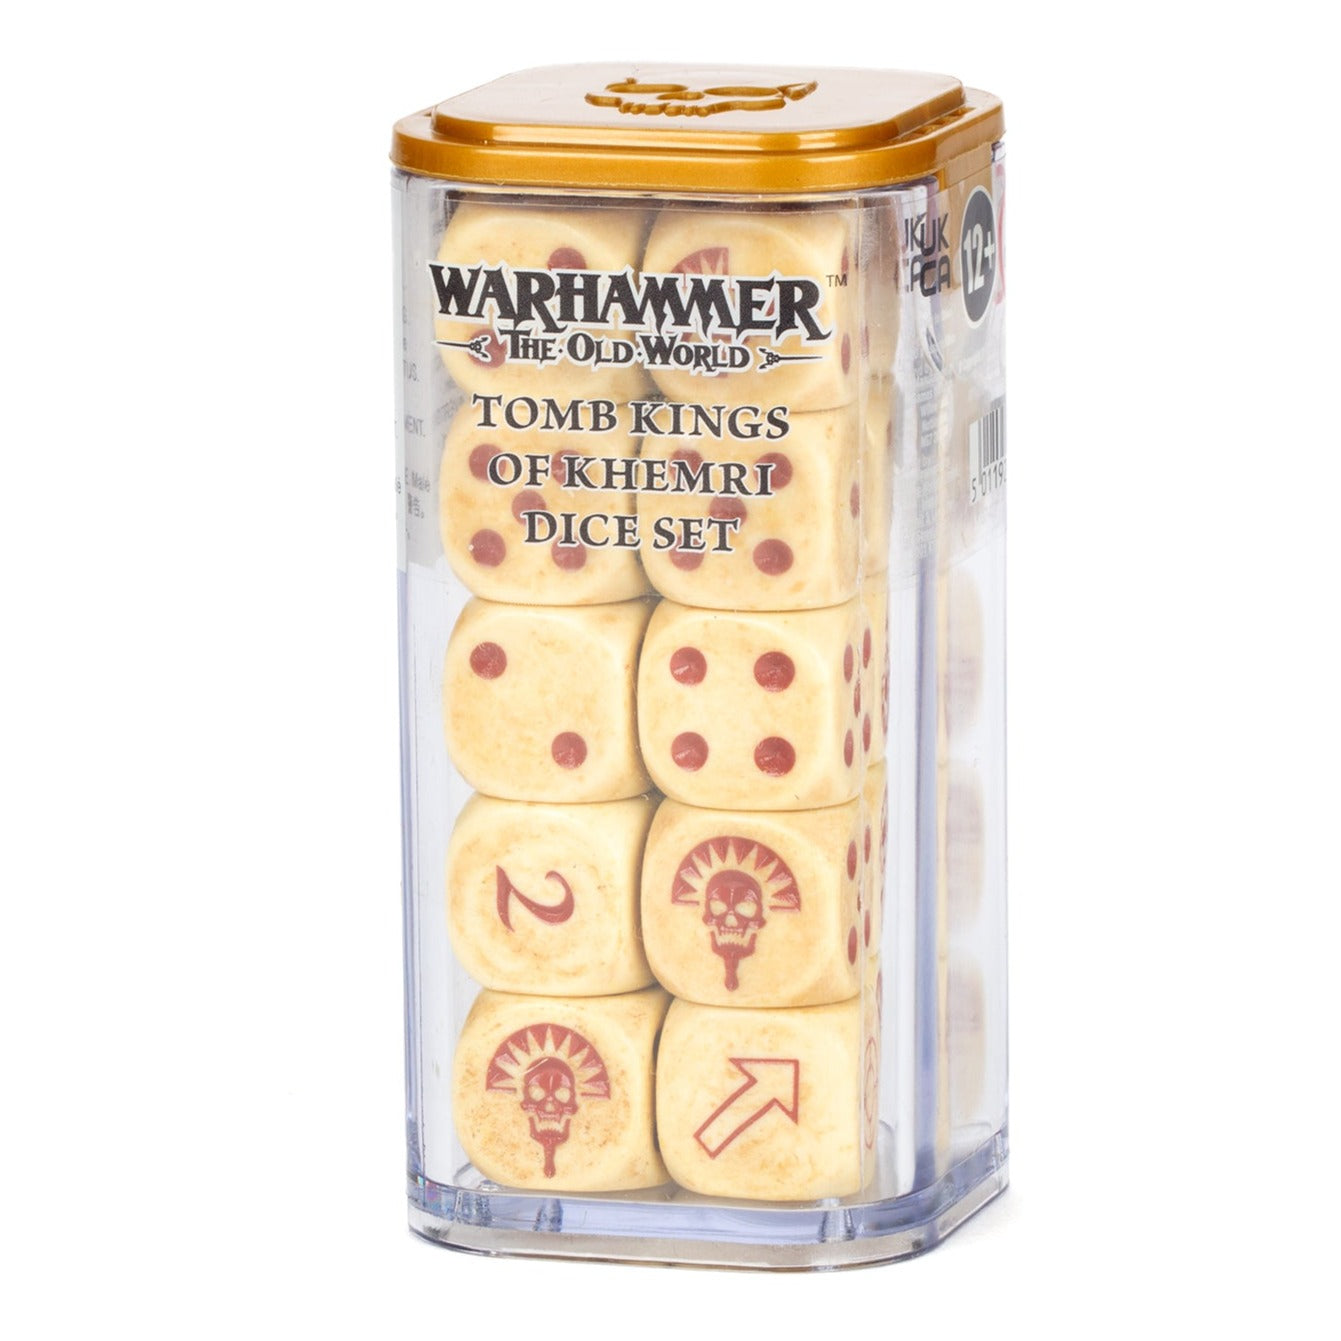 Warhammer: The Old World - Tomb Kings Of Khemri Dice - Release Date 20/1/24 - Loaded Dice Barry Vale of Glamorgan CF64 3HD